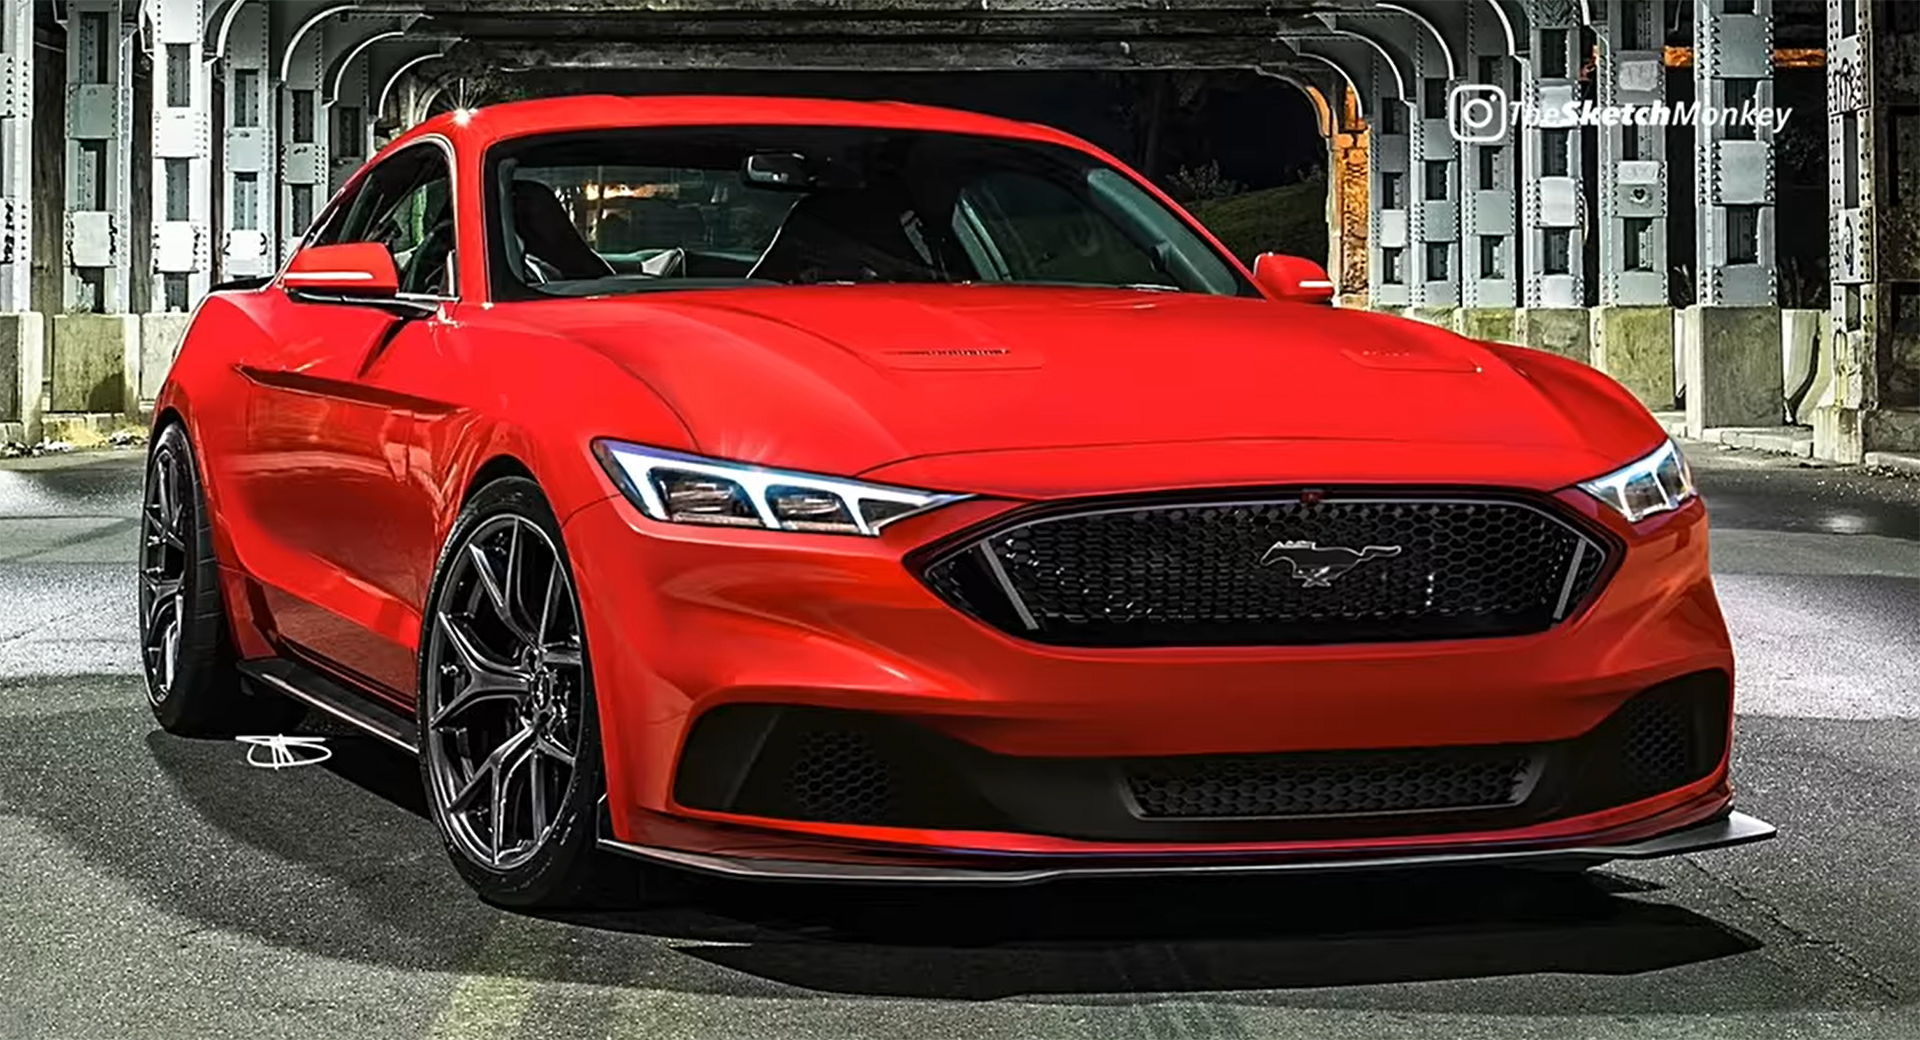 Think The 2025 Ford Mustang S650 Will Look Anything Like This Render?  Carscoops